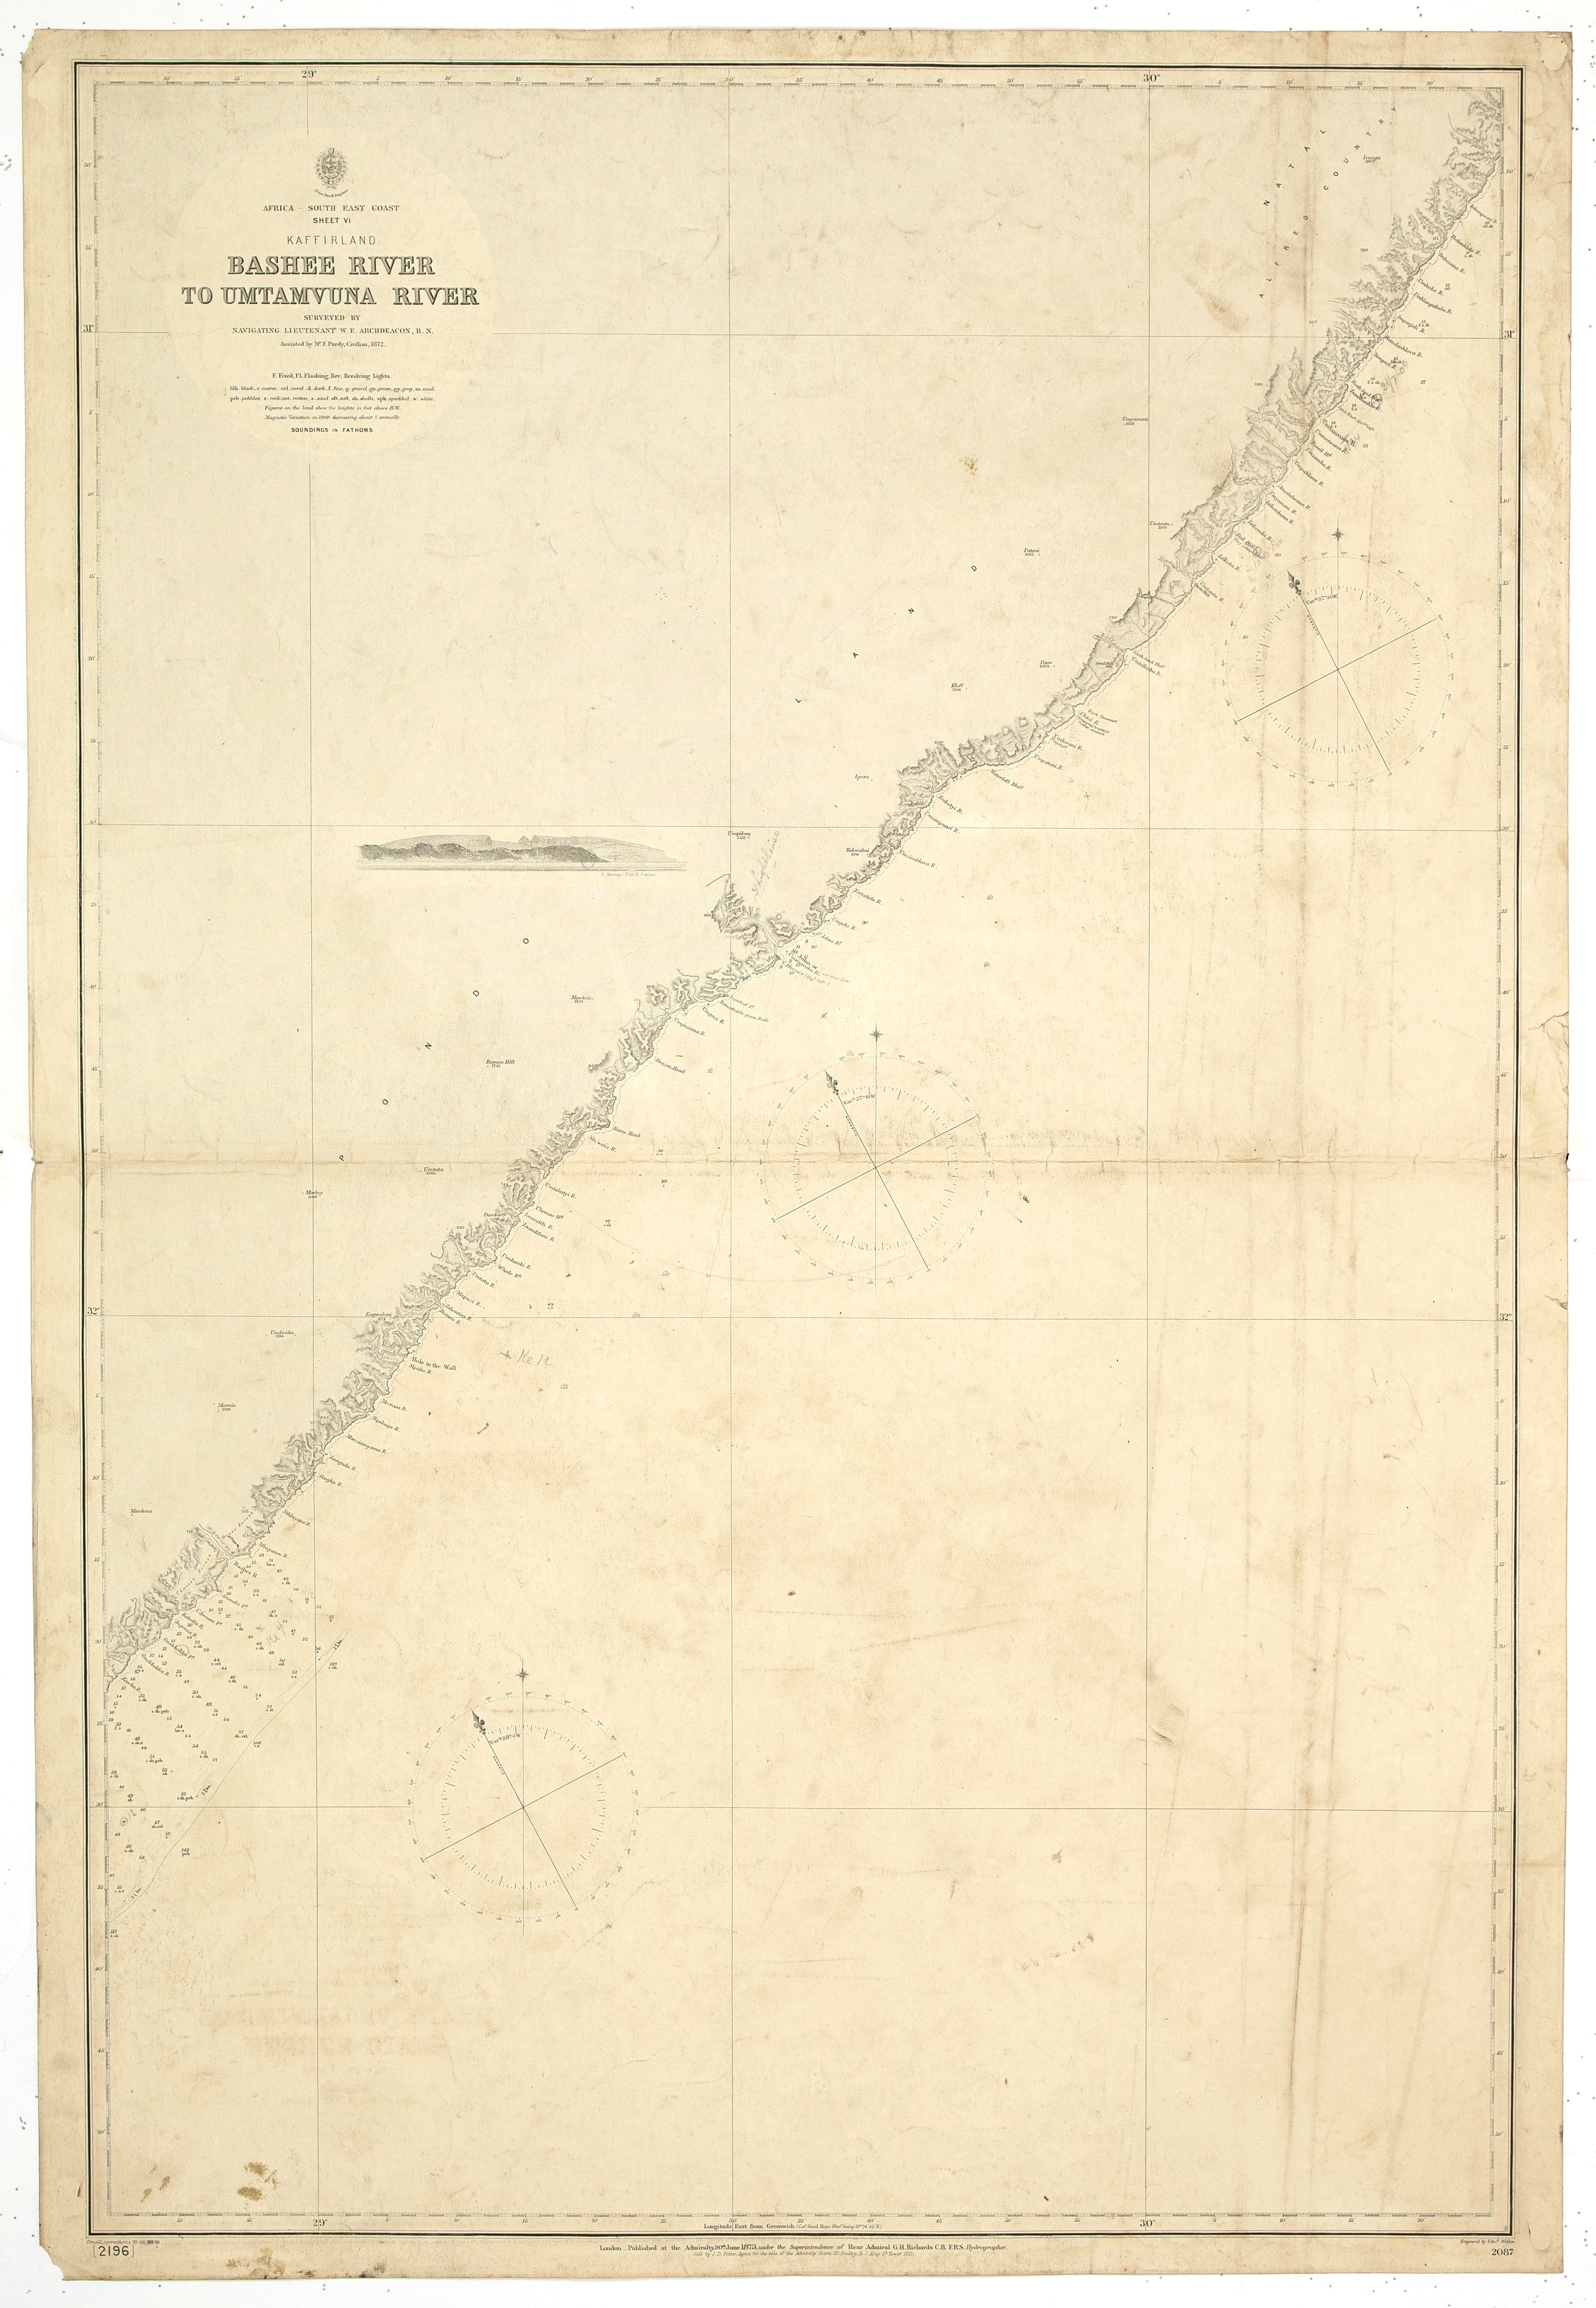 Africa - South East Coast Sheet VI Kaffirland Banshee River to Umtamuuna River Surveyed by Navigating Lieutenant W. E. Archdeacon. R.N. Assisted by Mr F. Purdy, Civilian 1872